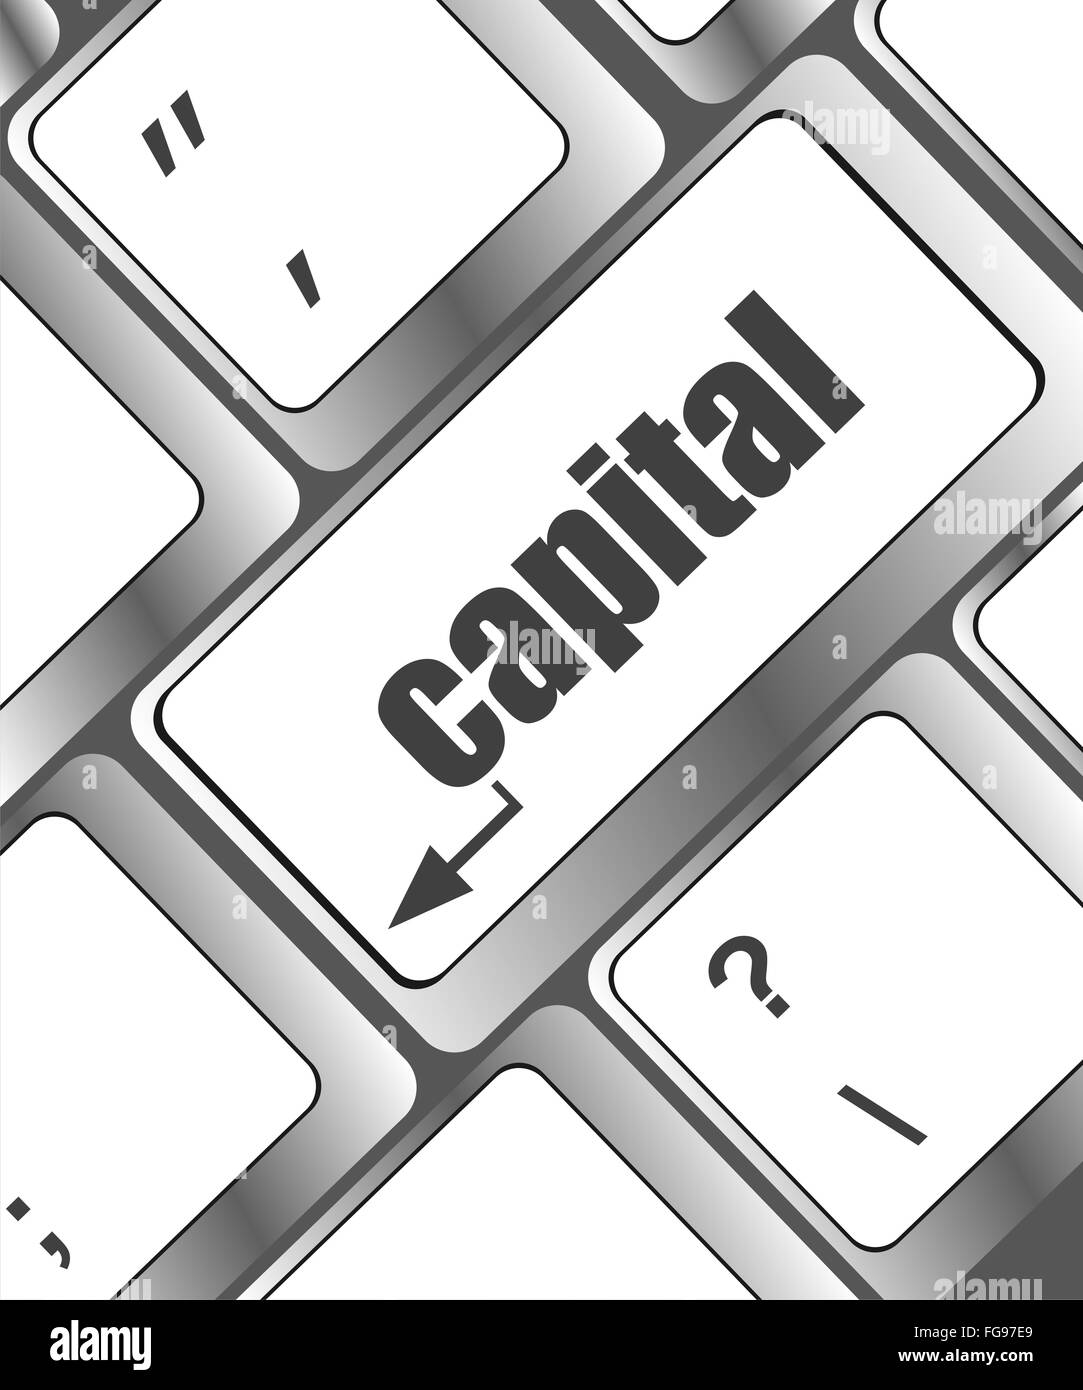 capital button on keyboard - business concept Stock Photo